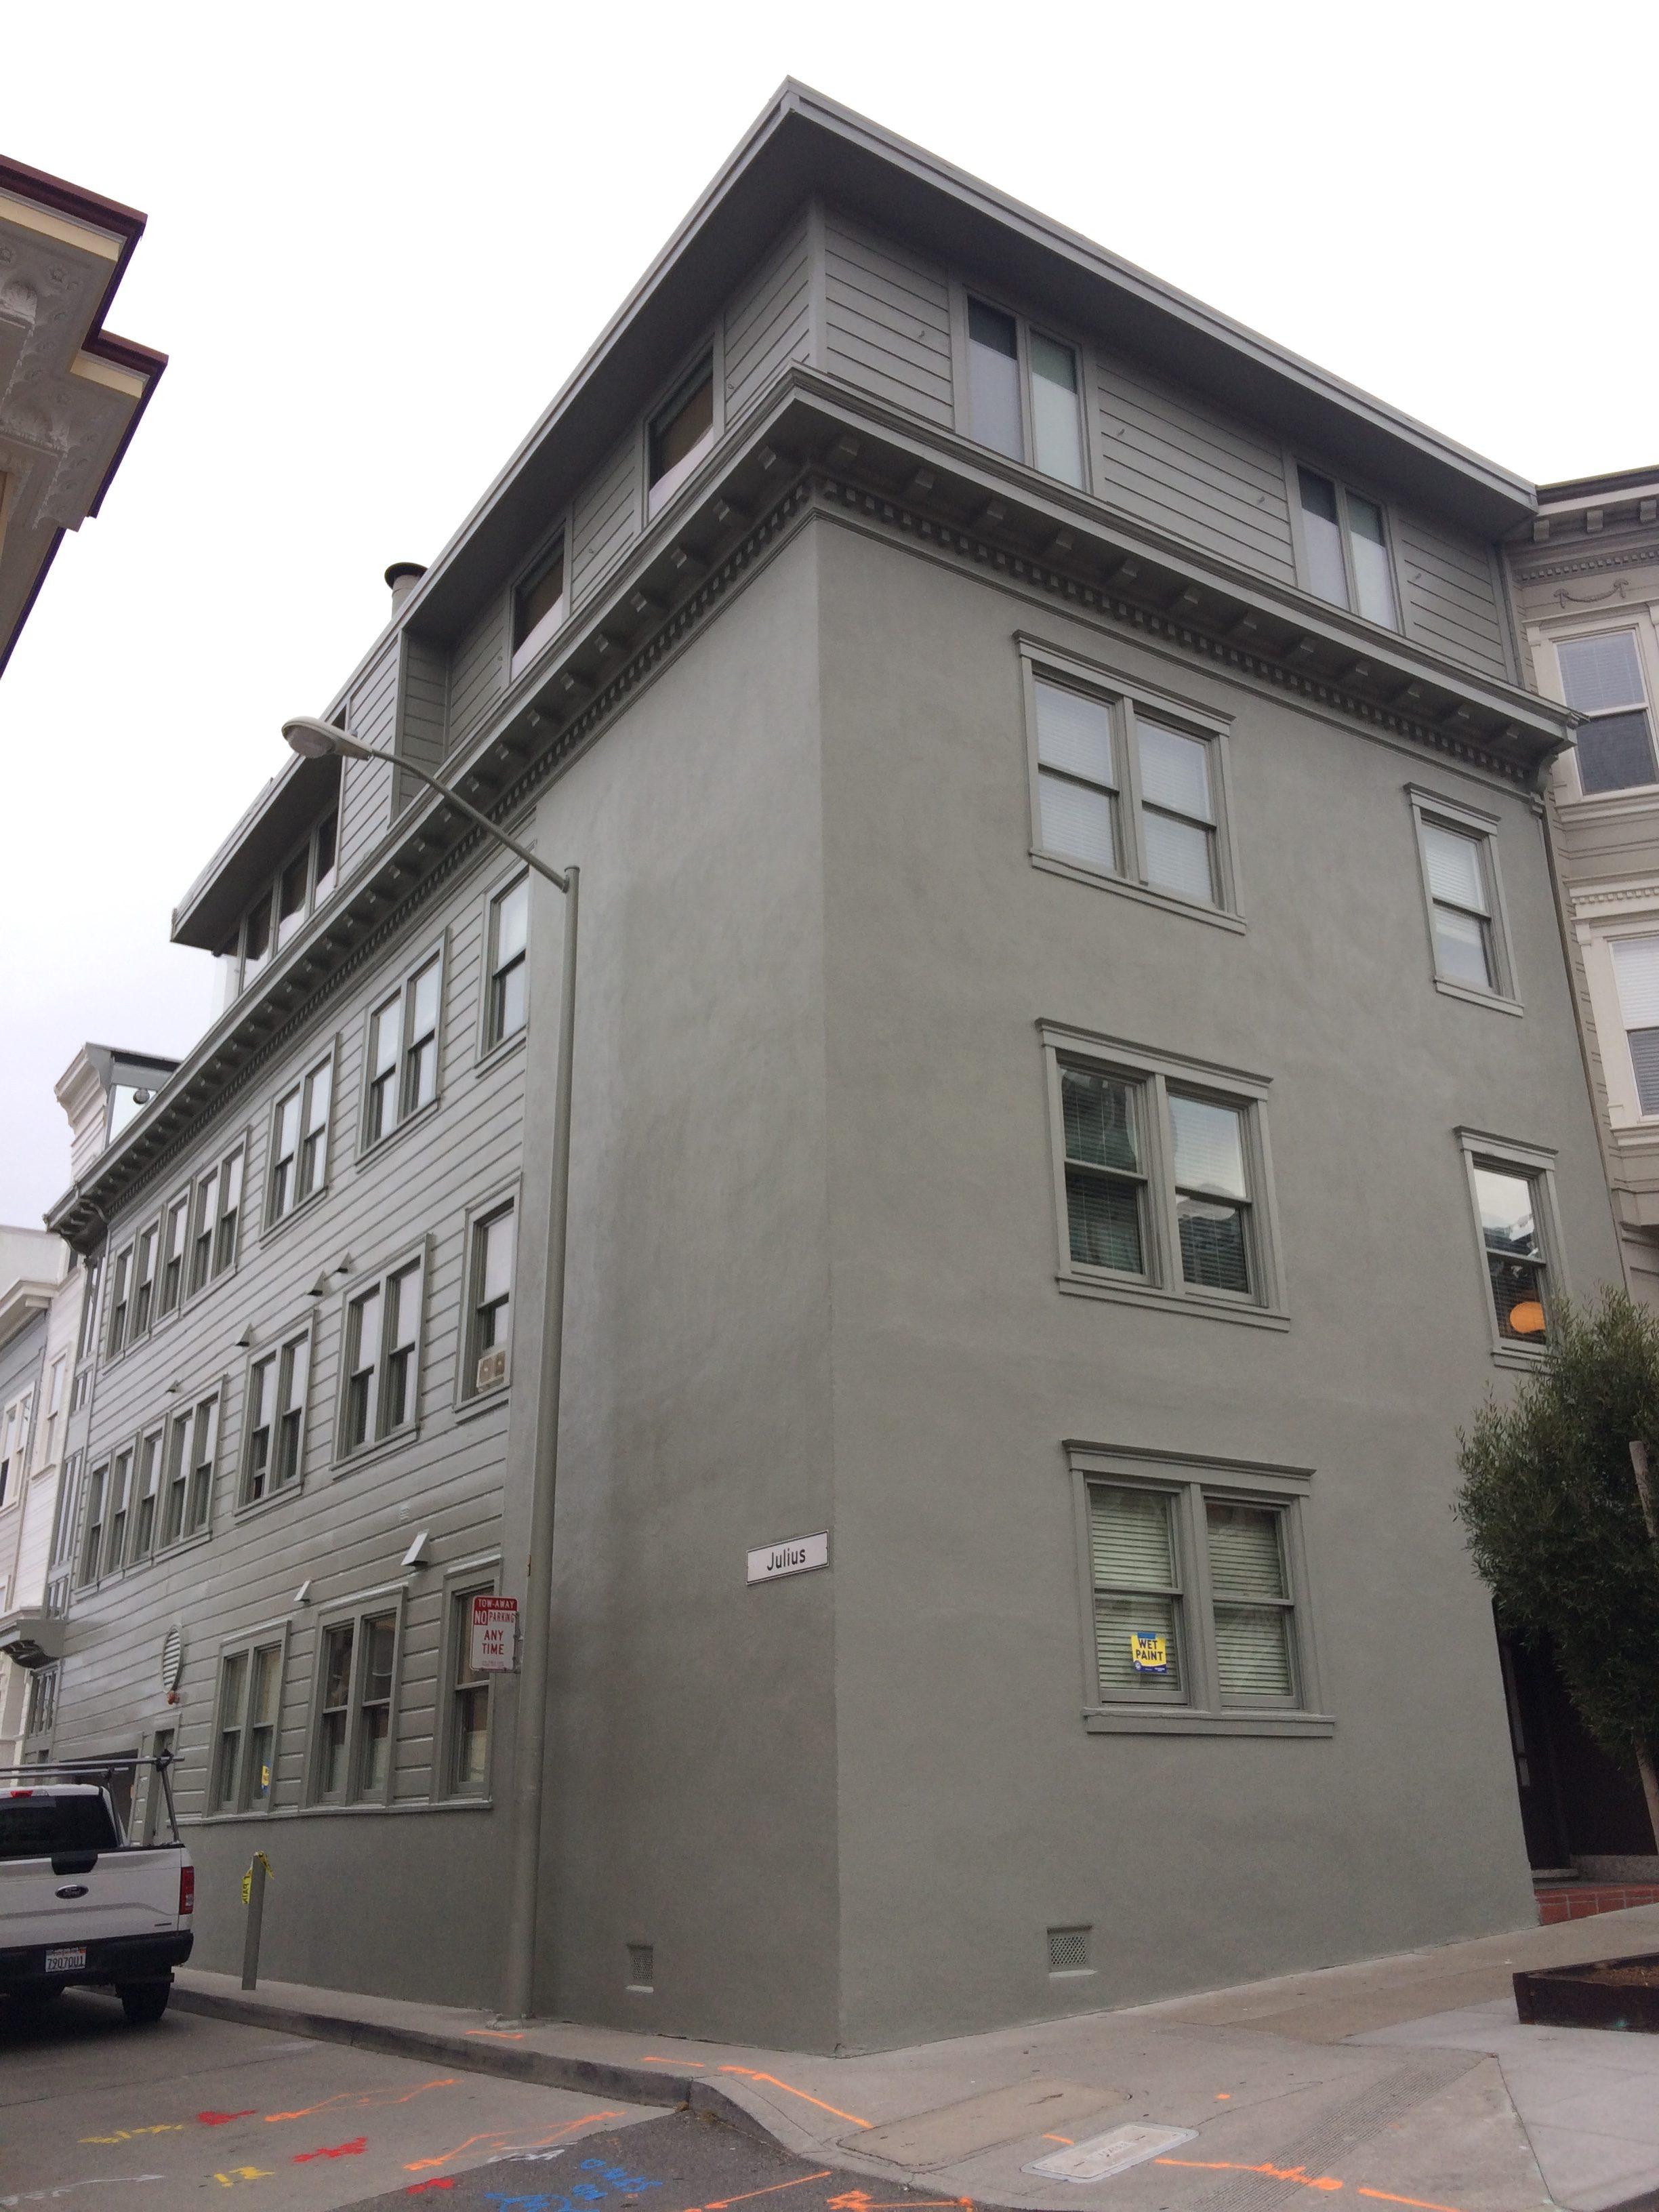 Picture of Michael Sack Painting painted this property in San Francisco's Sunset District. - Michael Sack Painting, Inc.